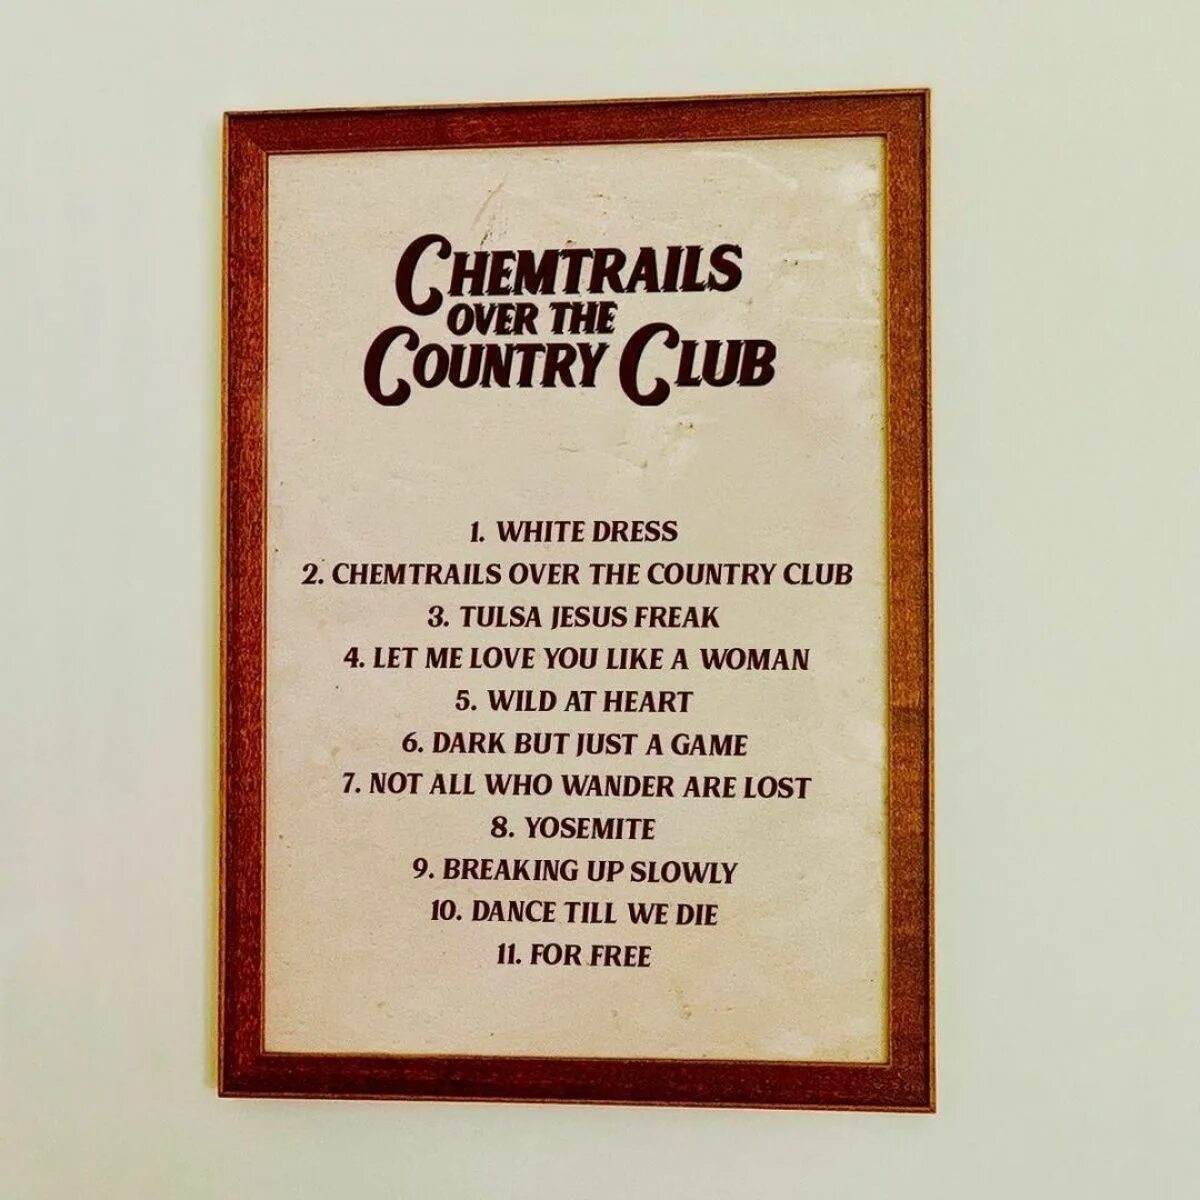 Chemtrails over the Country Club. Lana del Rey Chemtrails over the Country Club album. Lana del Rey Chemtrails over the Country Club 2021. Песня chemtrails over the country